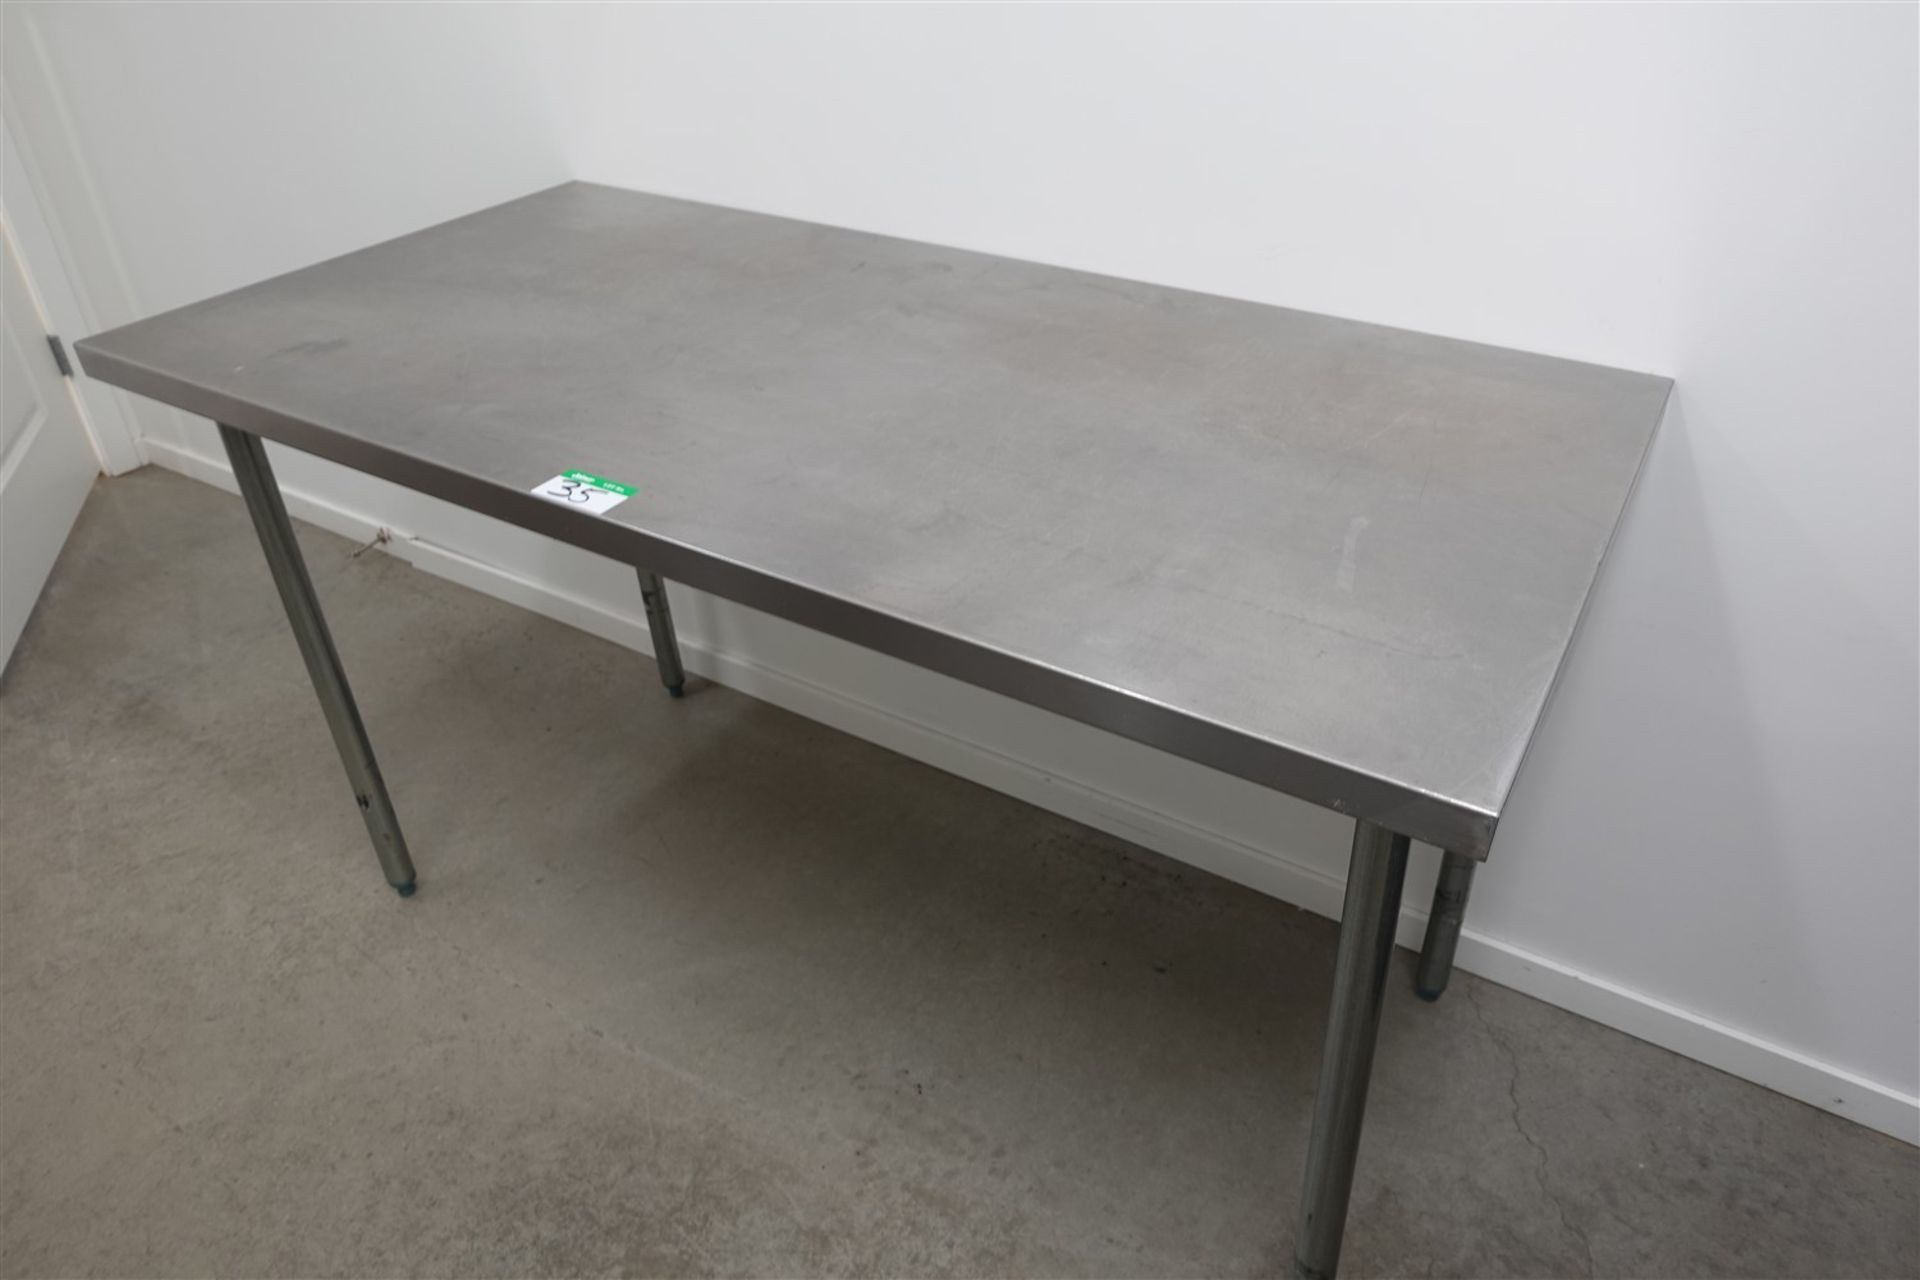 STAINLESS STEEL TABLE 30 IN. X 60 IN.